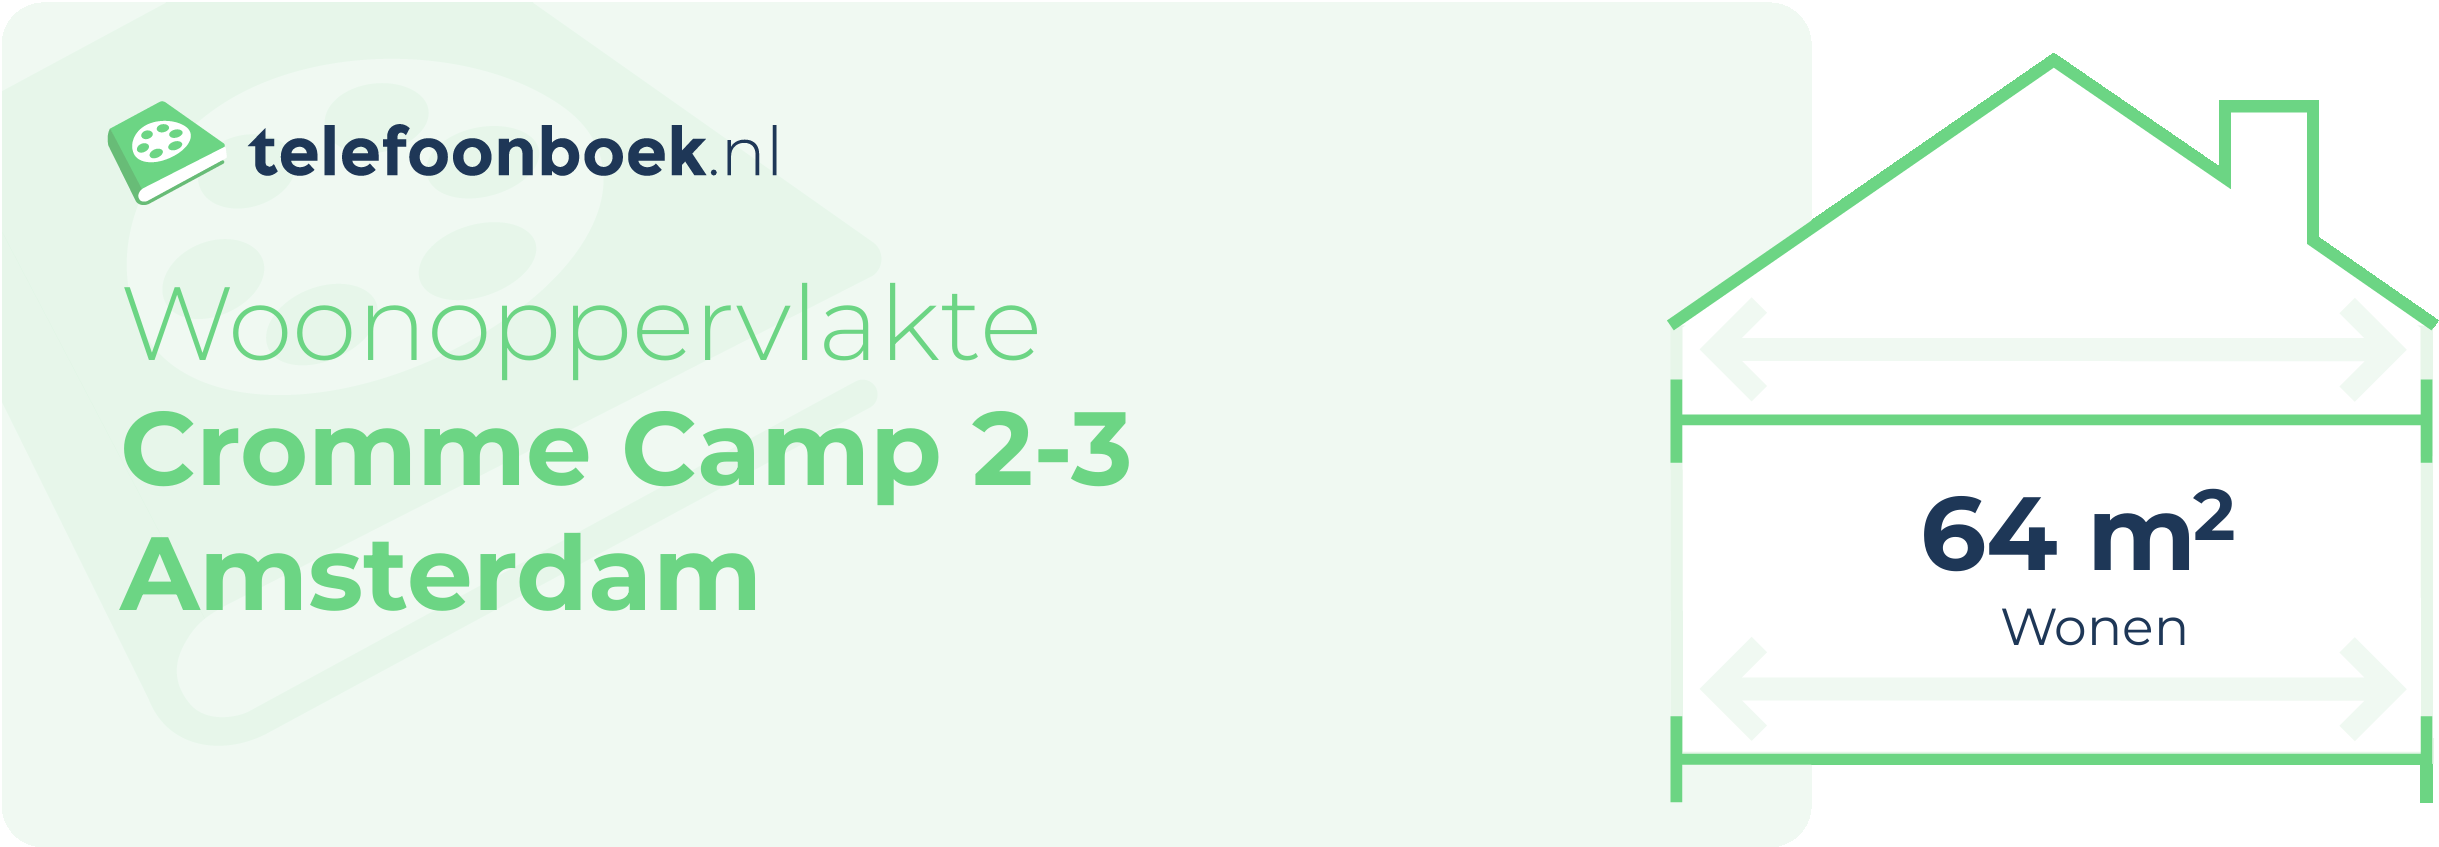 Woonoppervlakte Cromme Camp 2-3 Amsterdam